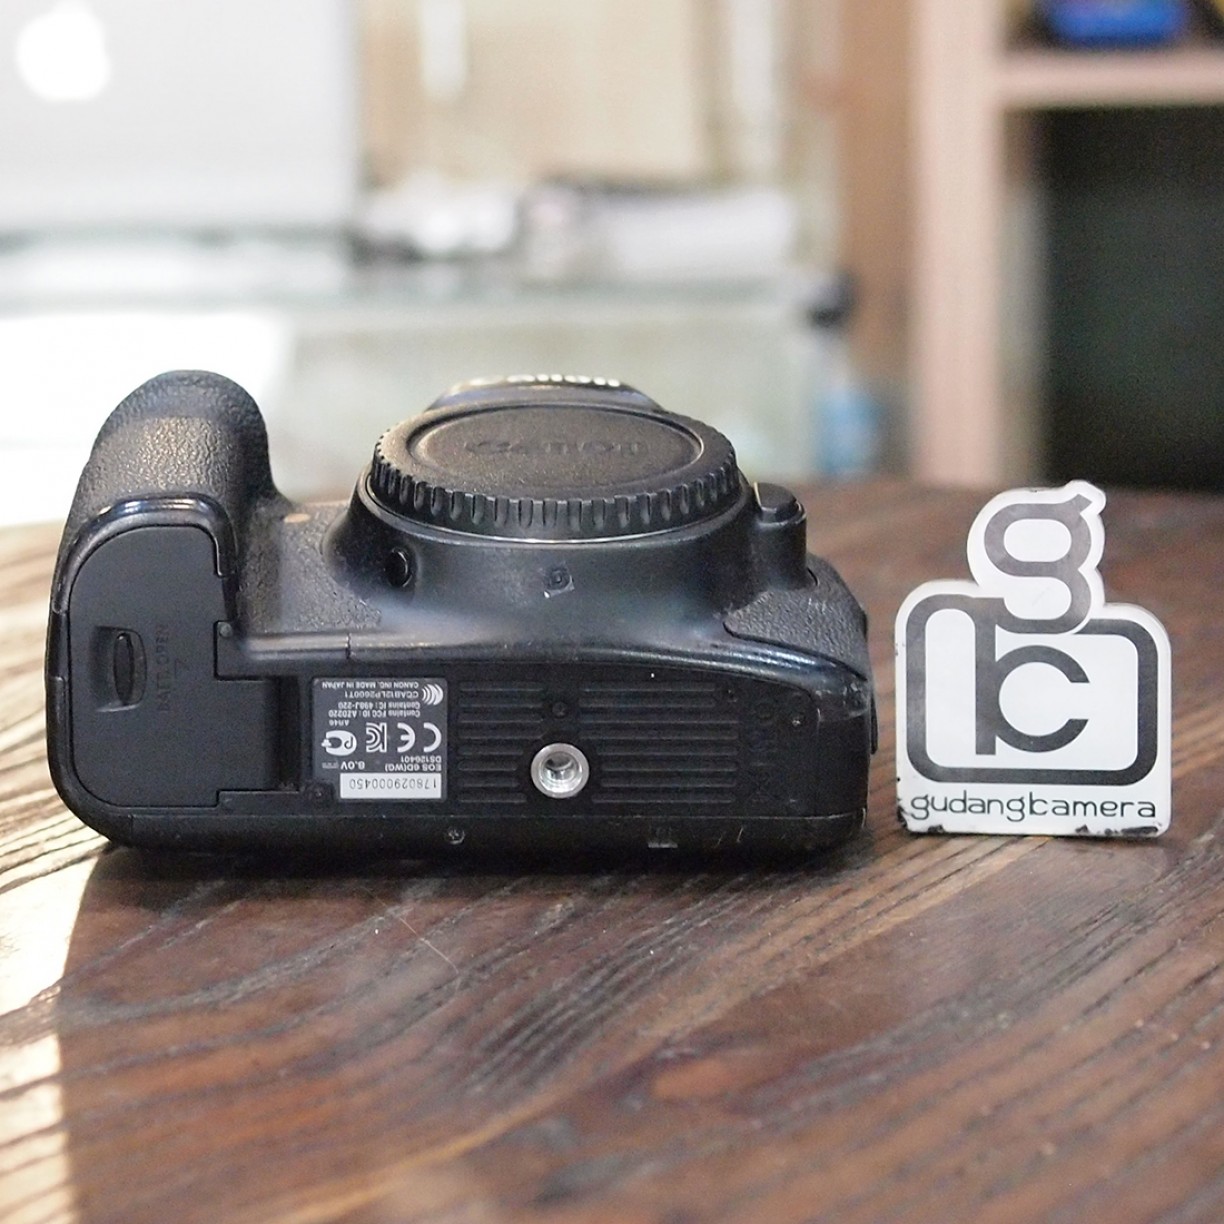 CANON EOS 6D BODY ONLY - GOOD CONDITION - 0450